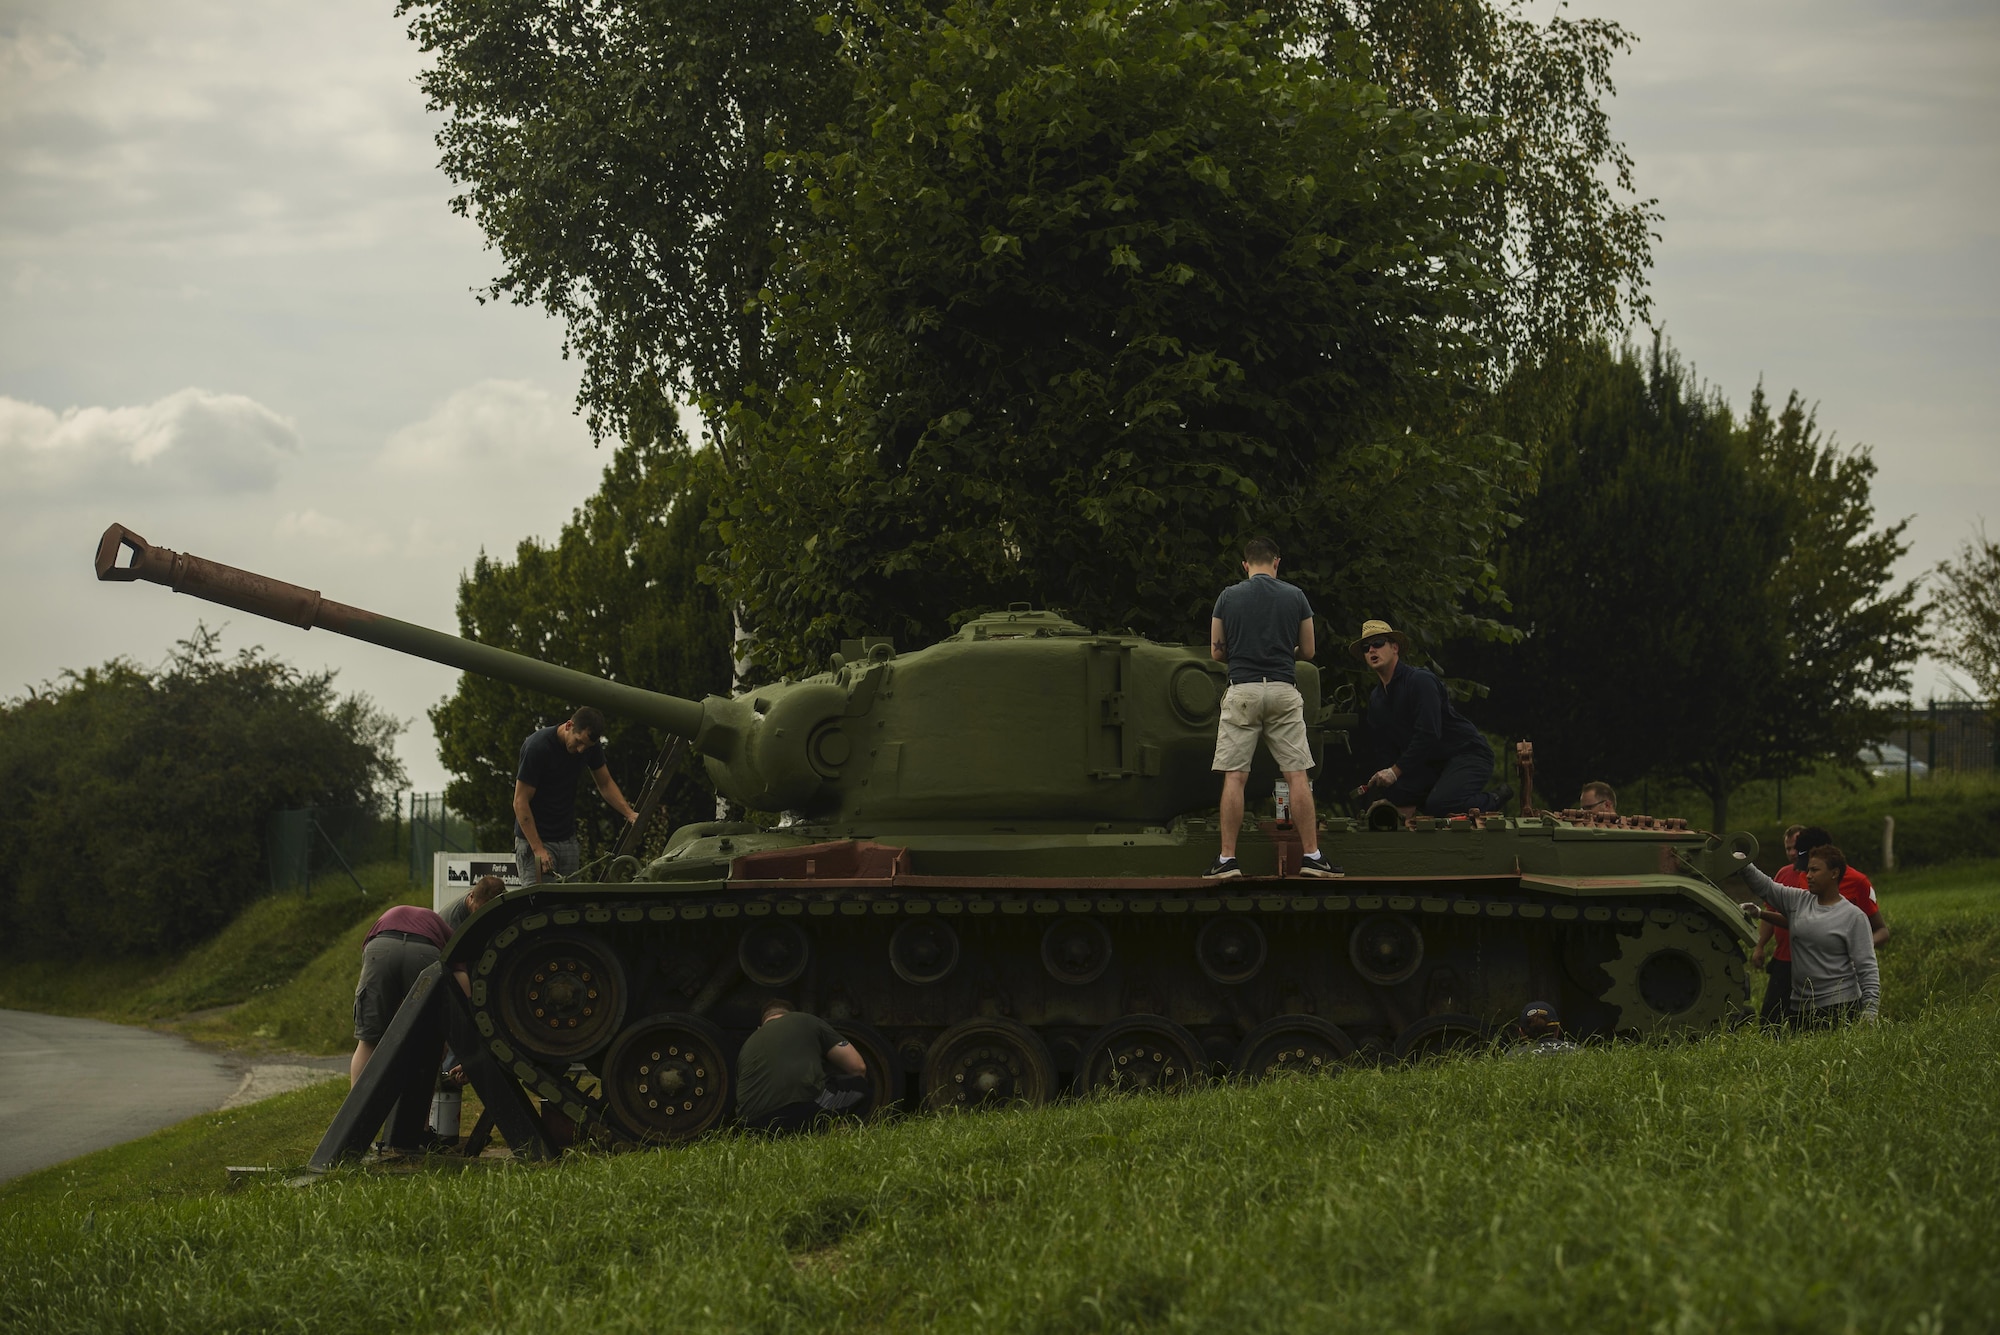 Airmen from the 52nd Logistics Readiness Squadron help paint an M4 Sherman tank in front of Fort Aubin-Neufchateau, Belgium, Aug. 28, 2016. More than 25 Airmen worked to help preserve and excavate a World War II era bunker. (U.S. Air Force photo by Staff Sgt. Jonathan Snyder/Released)